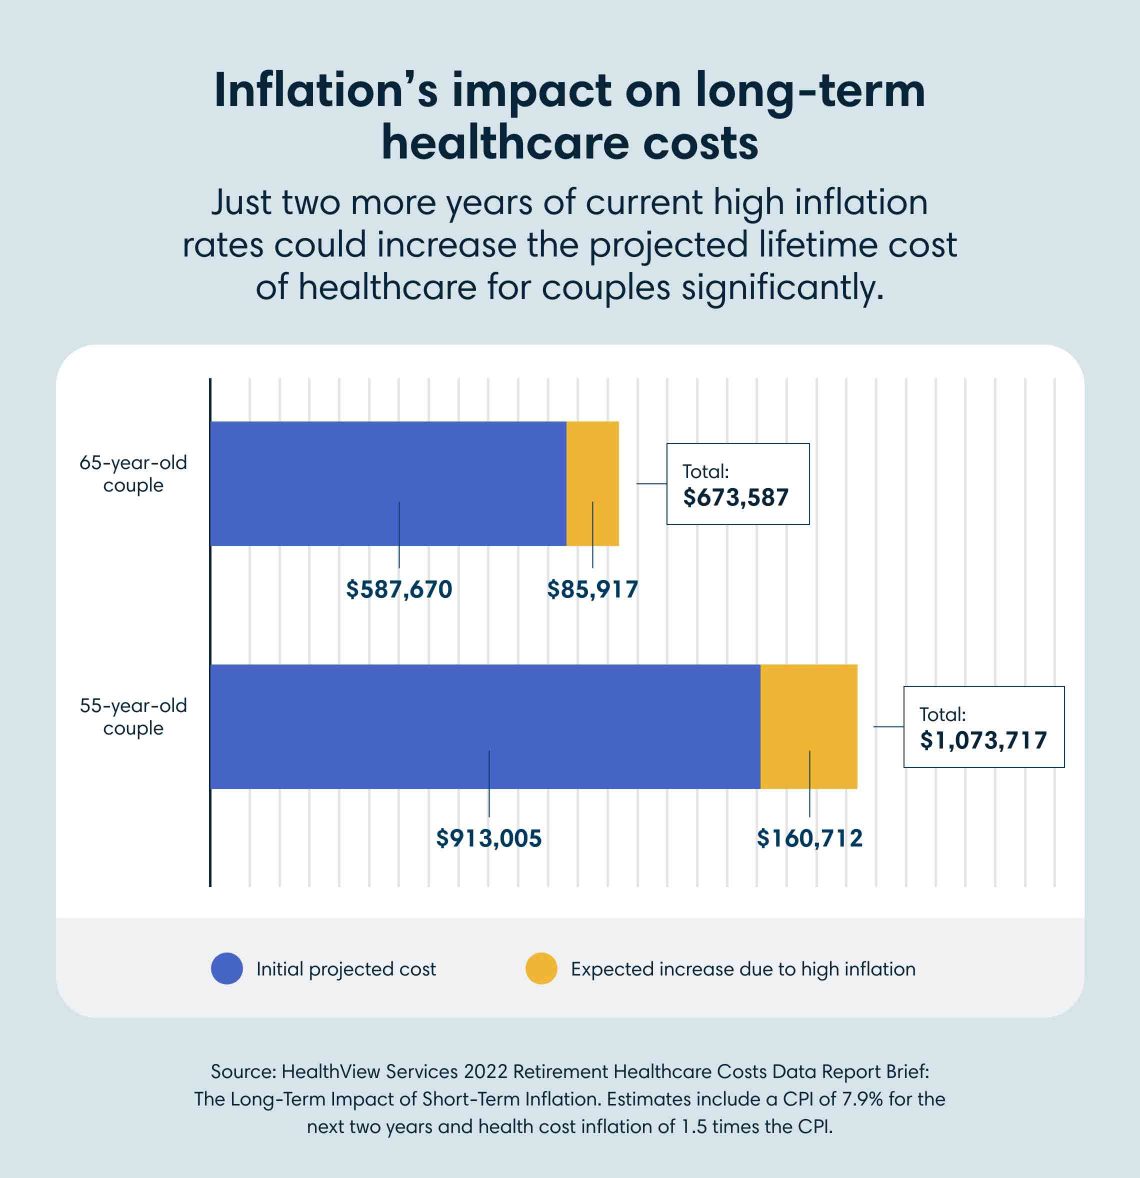 Chart showing impact of inflation on long term healthcare costs for 55 and 65-year-old couples; Source: Healthview Services 2022 Retirement Healhcare Costs Data Brief: The Long-Term Impact of Short-Term Inflation. Estimates include a CPI of 7.9% for the next two years and health care inflation of 1.5 times the CPI.